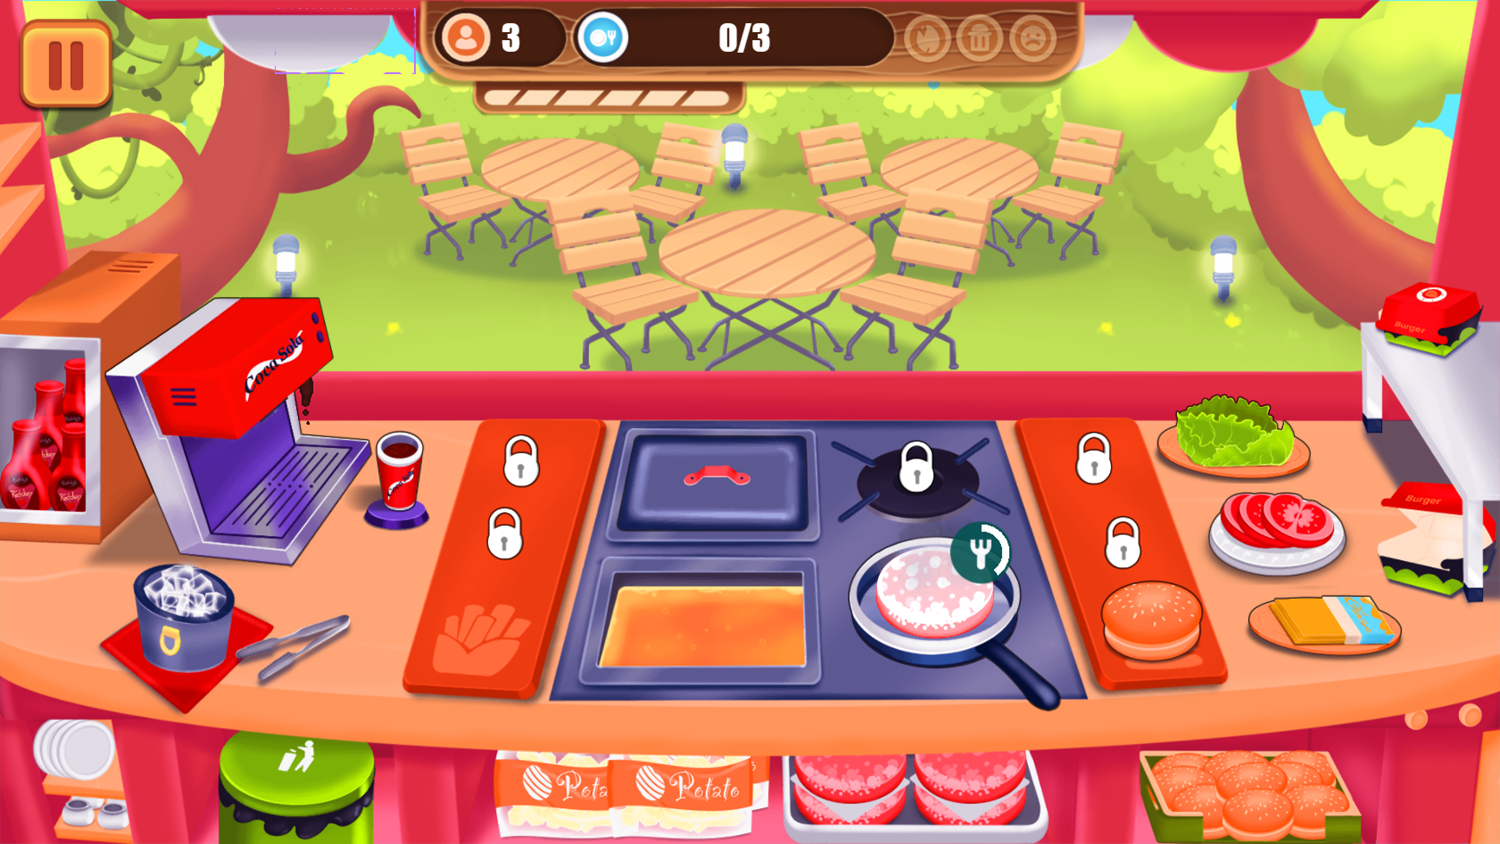 Cooking Fever Game Level Play Screenshot.